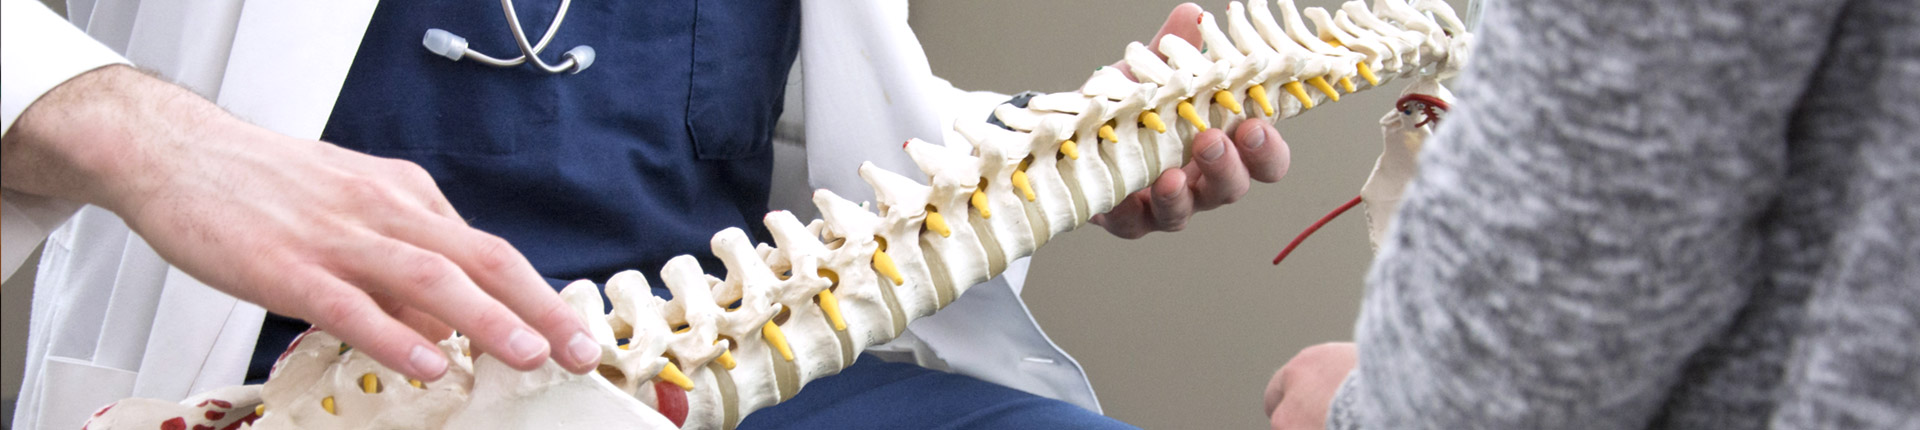 model of a spine